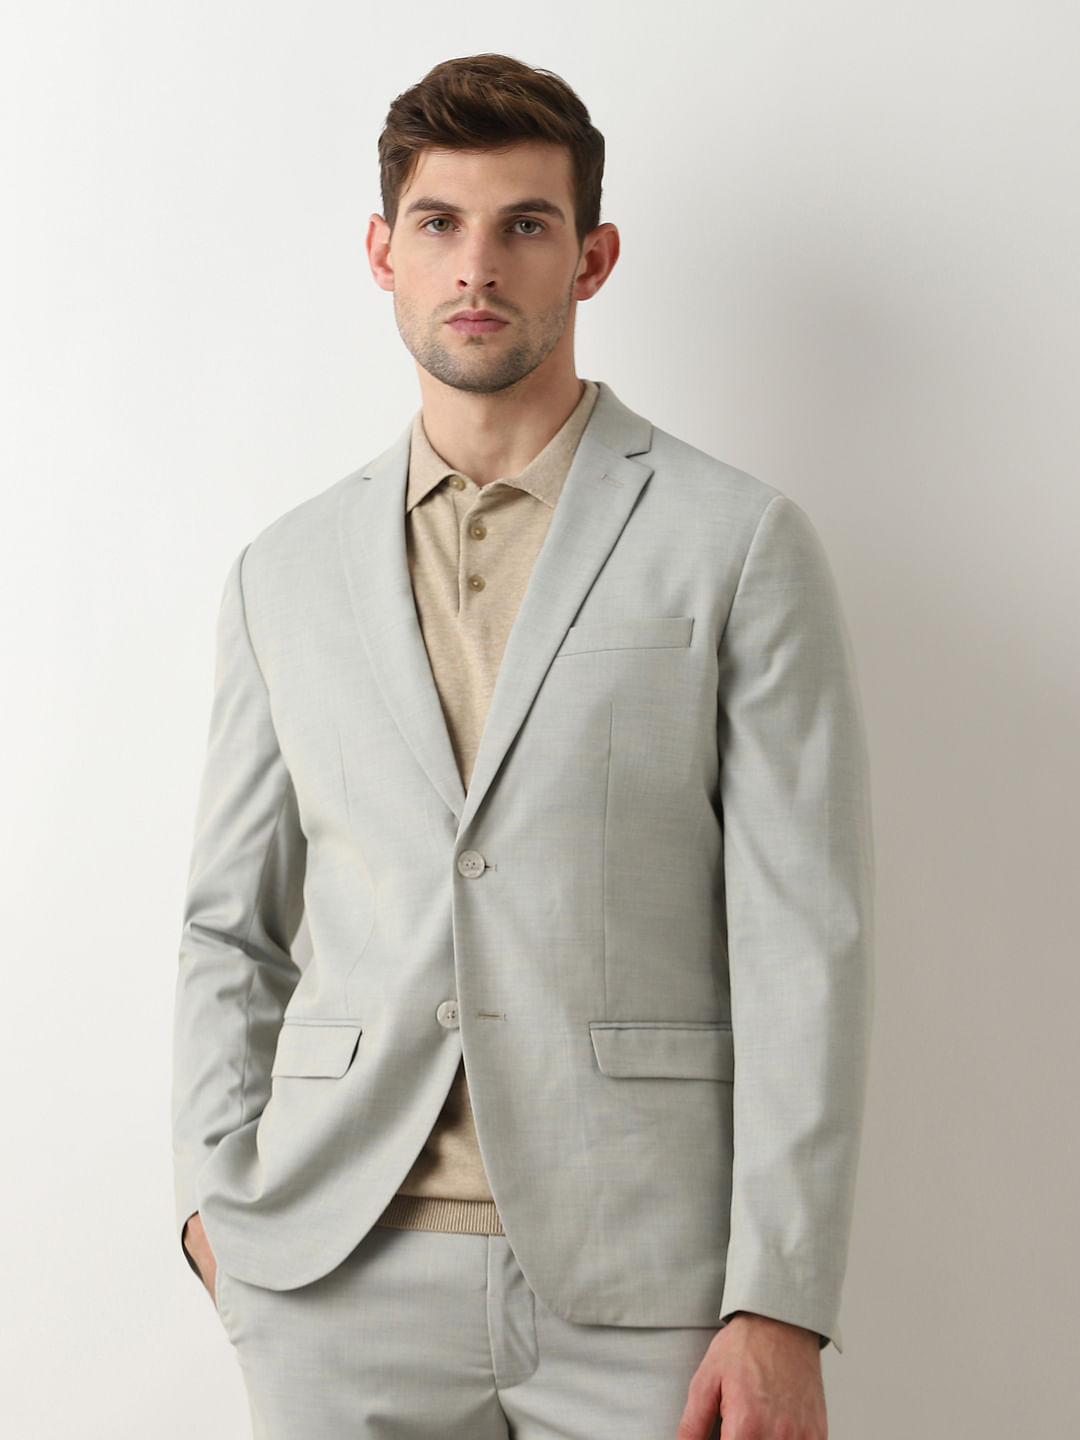 Classic Simple Mens Jeans Suit Slim Fit Grey Long Sleeve Jacket And Pants  Two Piece Casual Couple Male Denim Suits Size M 5XL From Iceyyoung, $57.05  | DHgate.Com